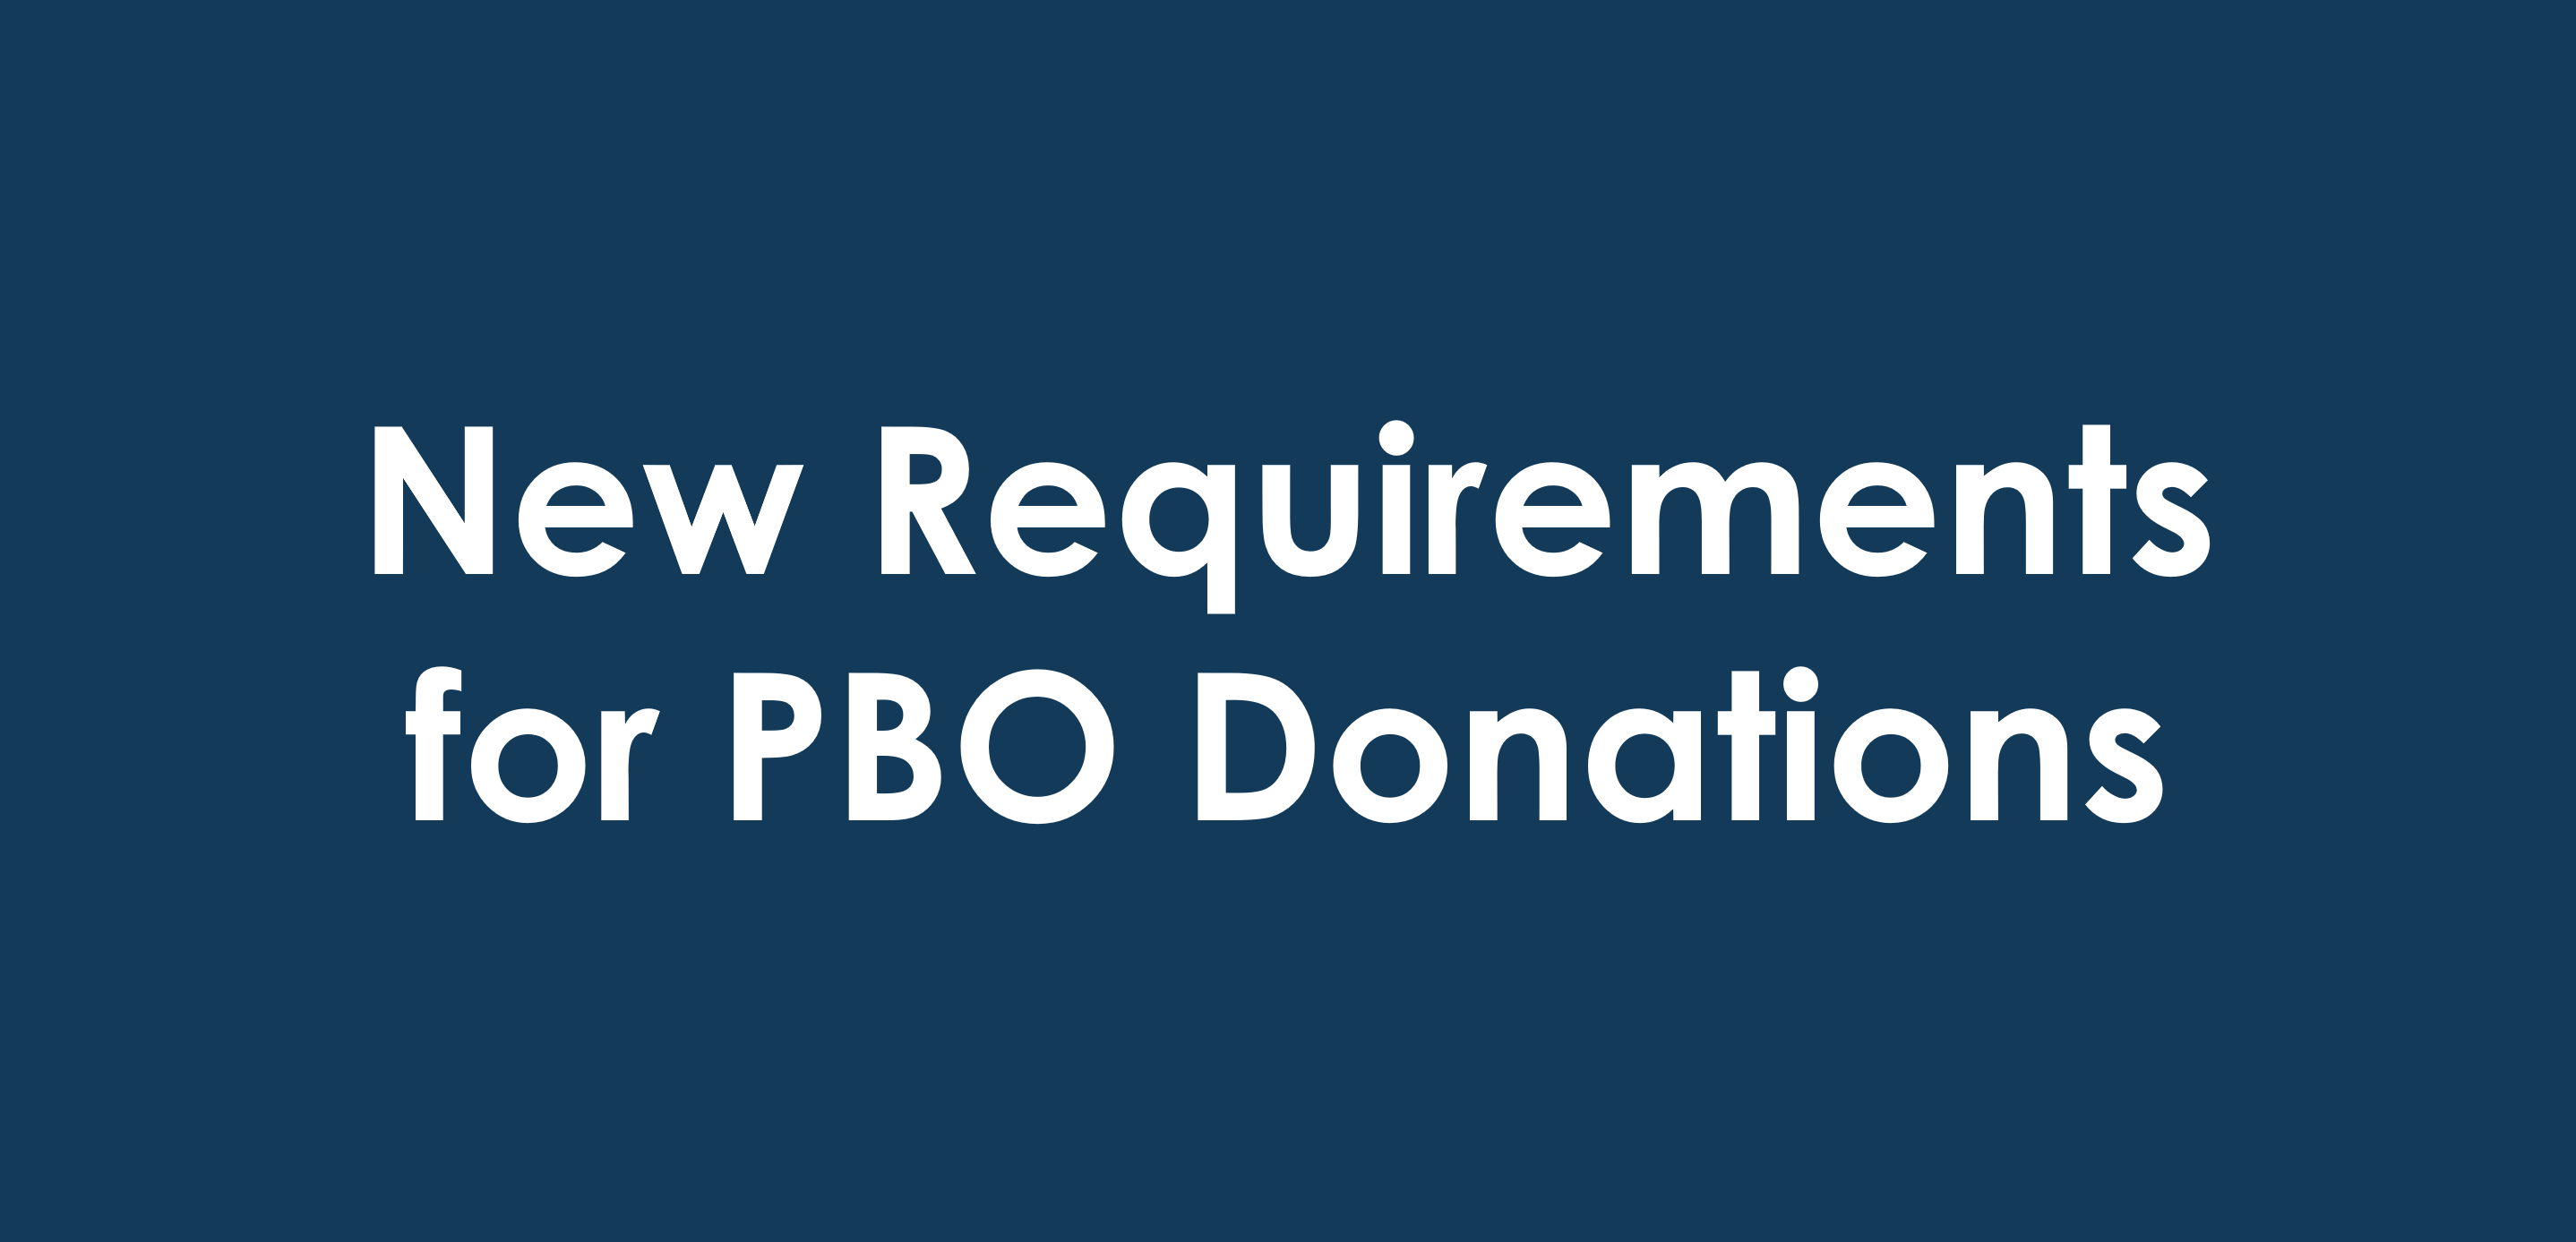 New Requirements for PBO Donations